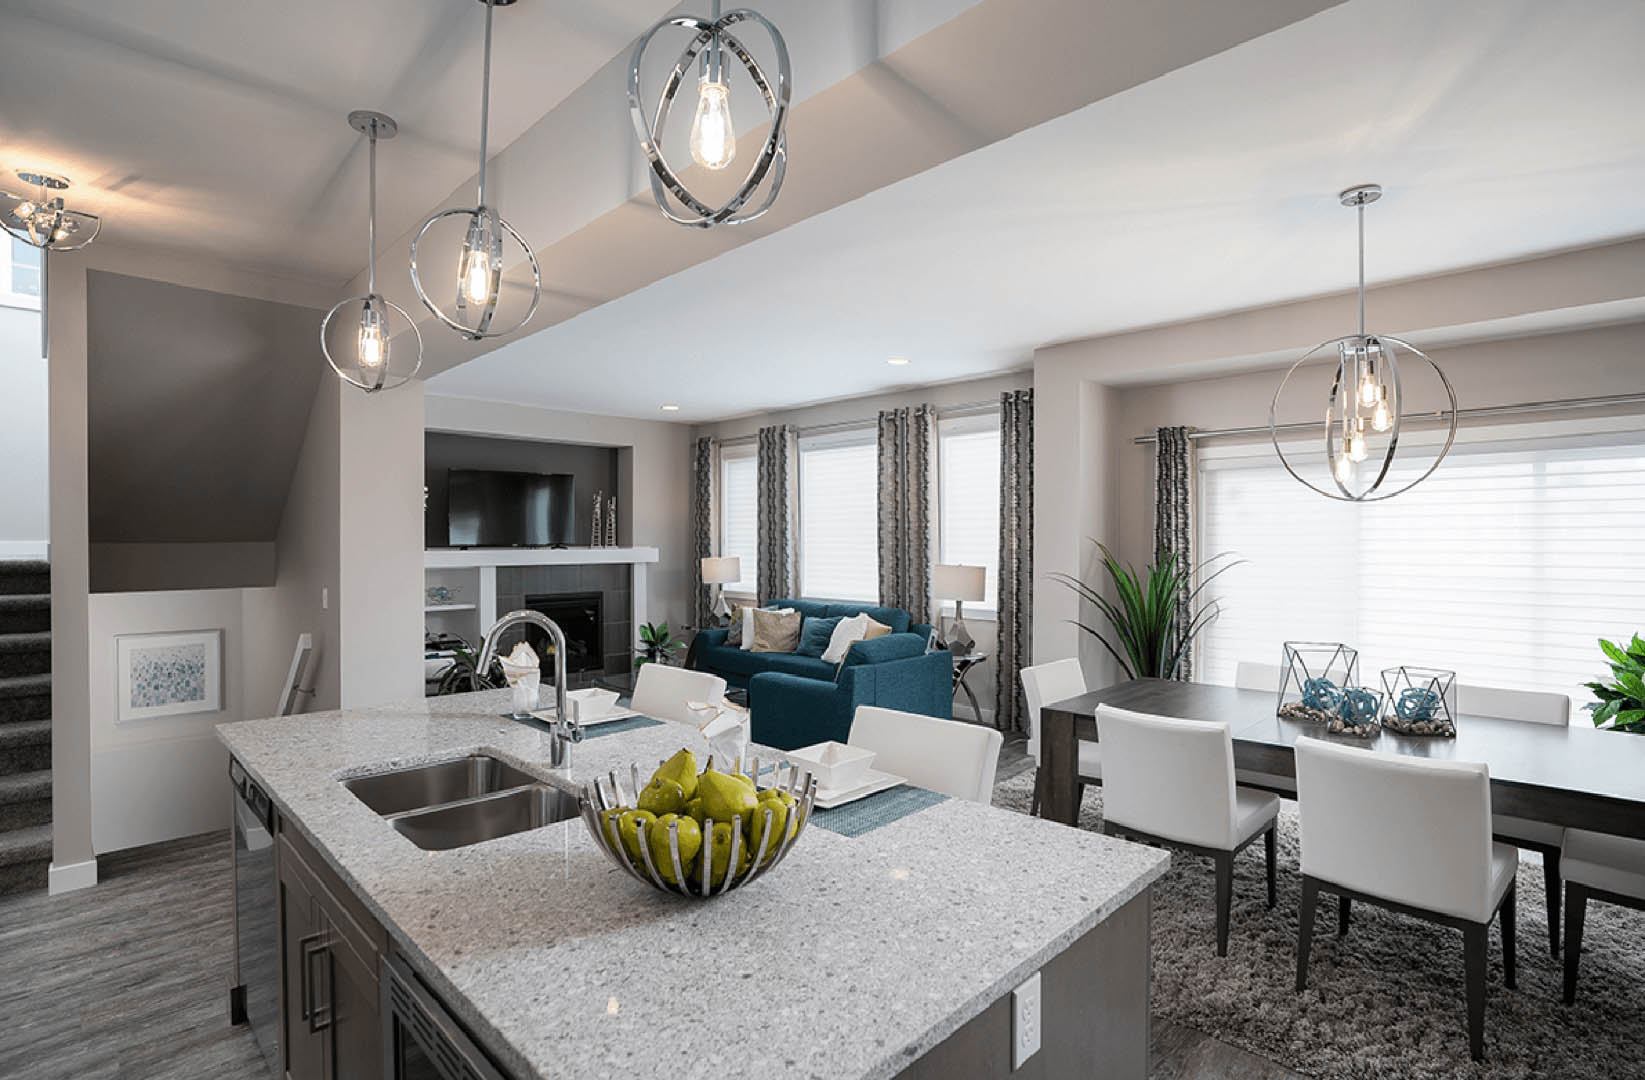 Sneak Peak at a New Broadview Showhome Kitchen Living Image